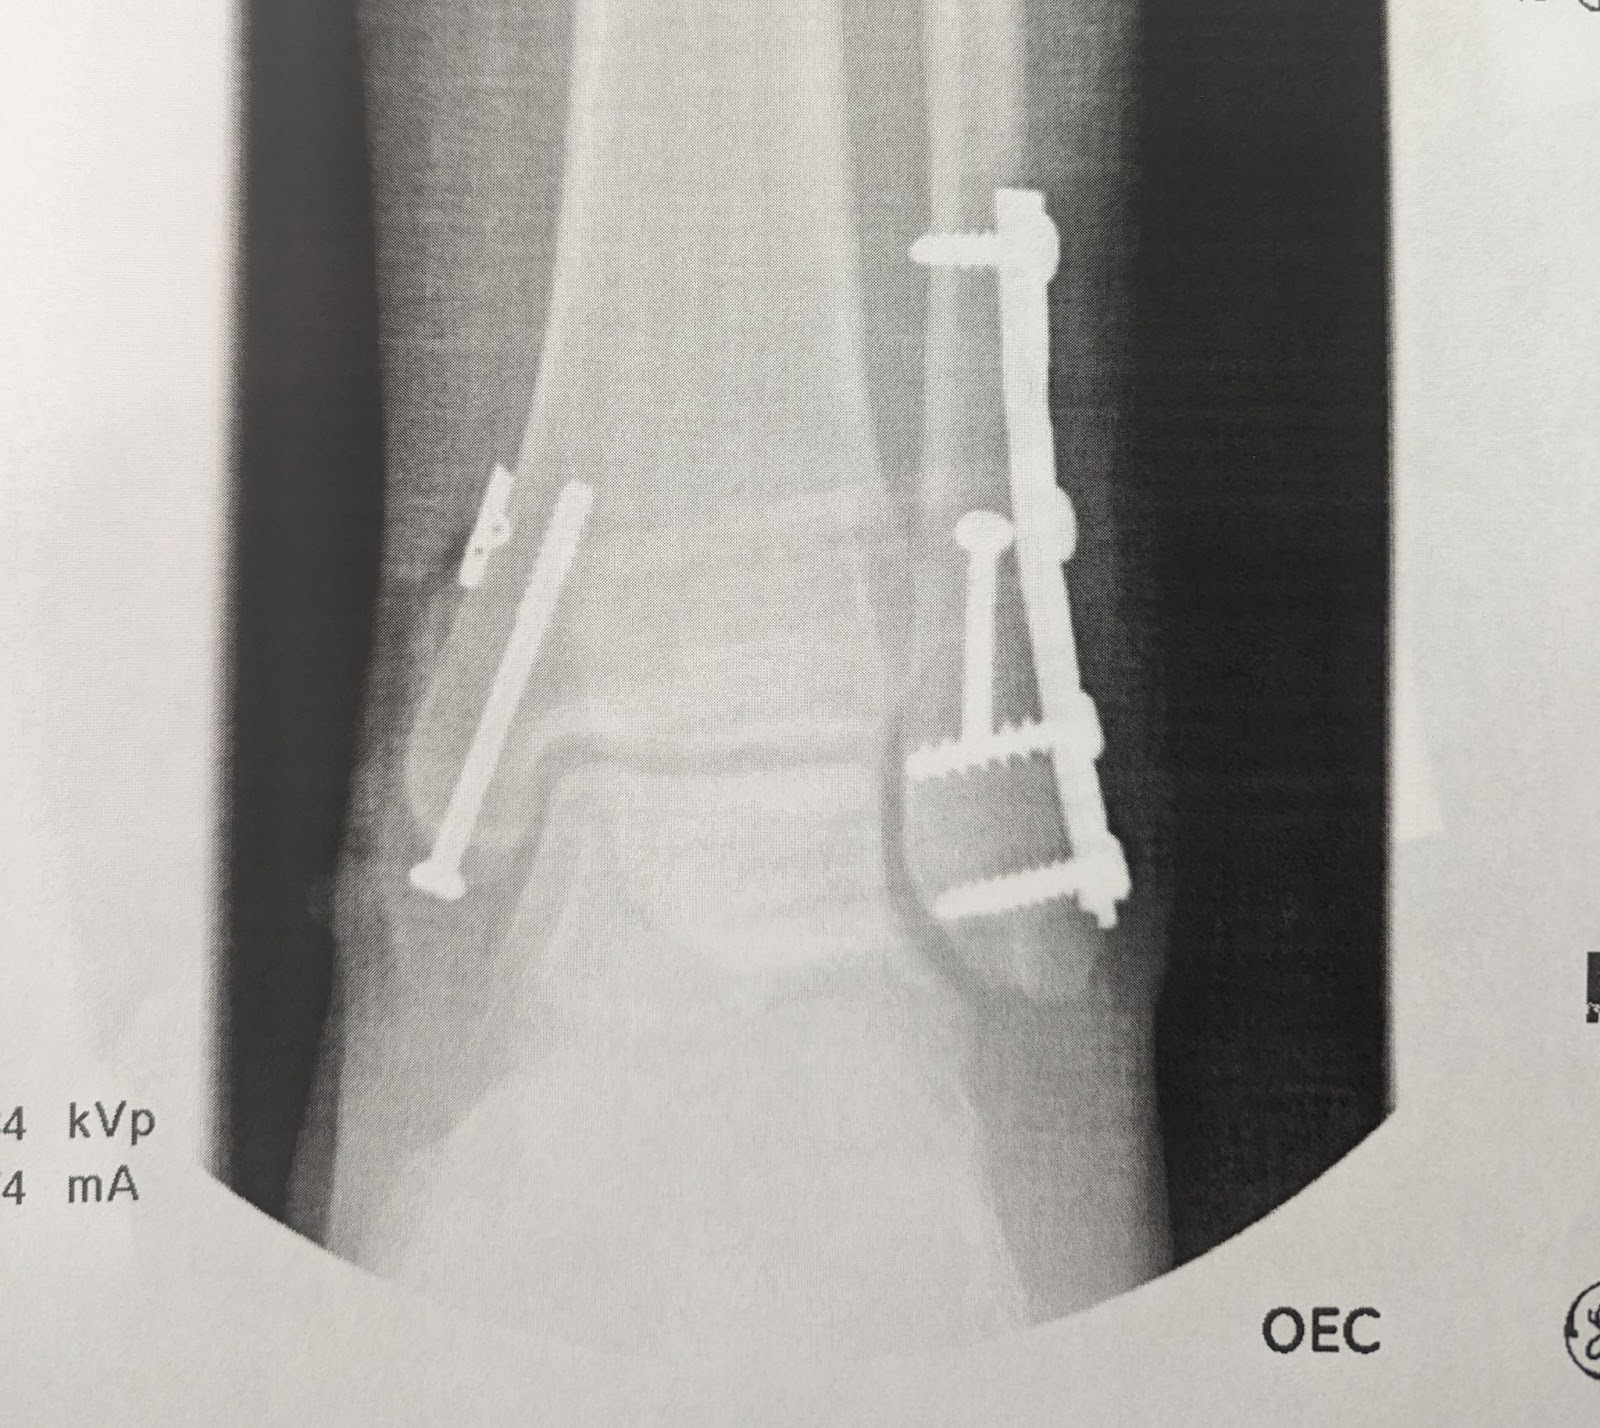 A photo of an X-ray with an injured ankle.